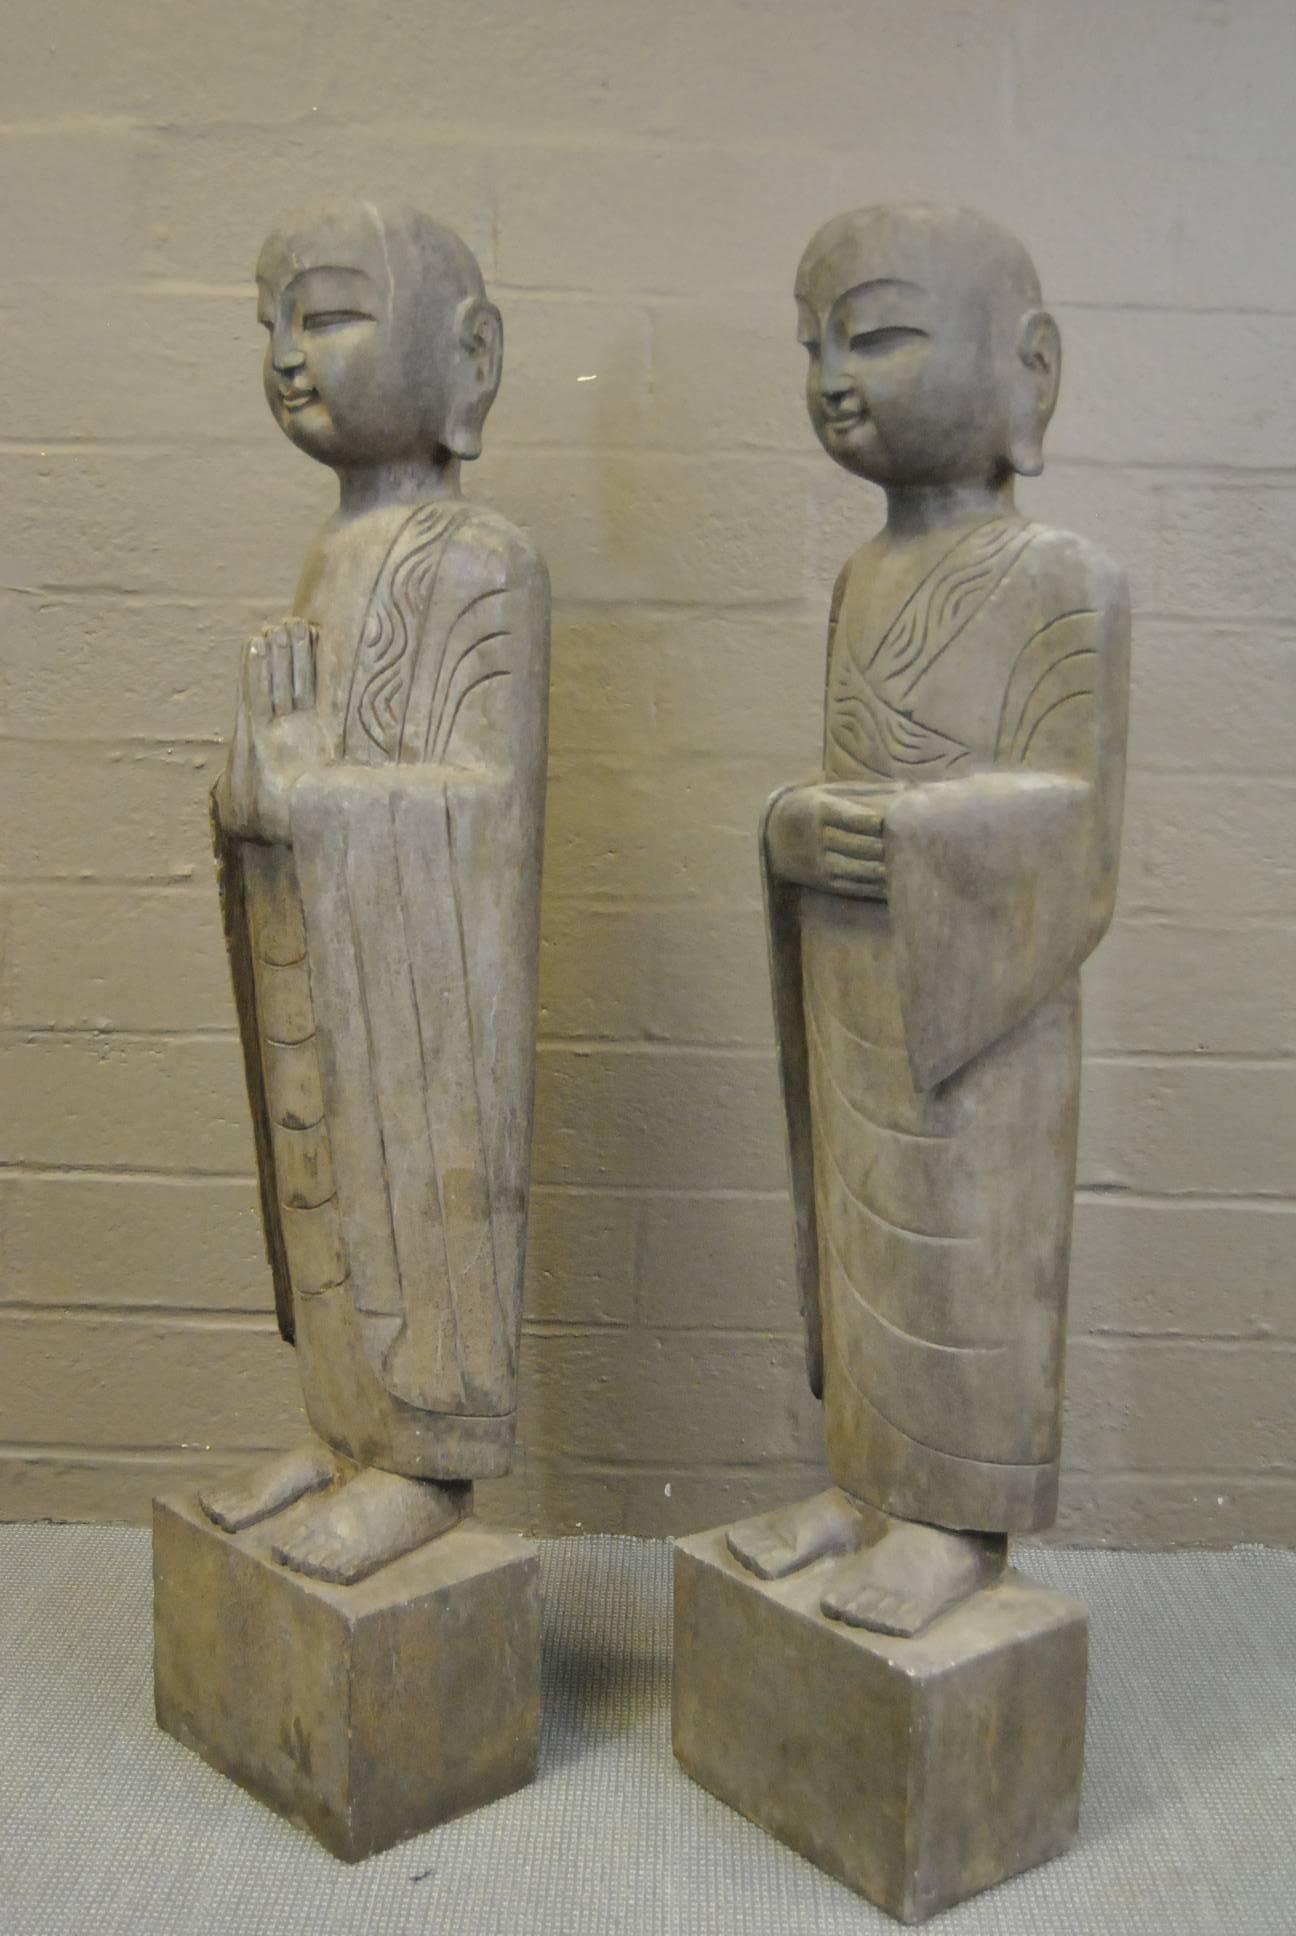 A pair of exquisite carved hard stone Asian figural statutes or sculptures. These figures depict two of the 18 Lohans or Arhats, who were the personal disciples of the Buddha and are characterized by their eccentricity and supernatural powers. These